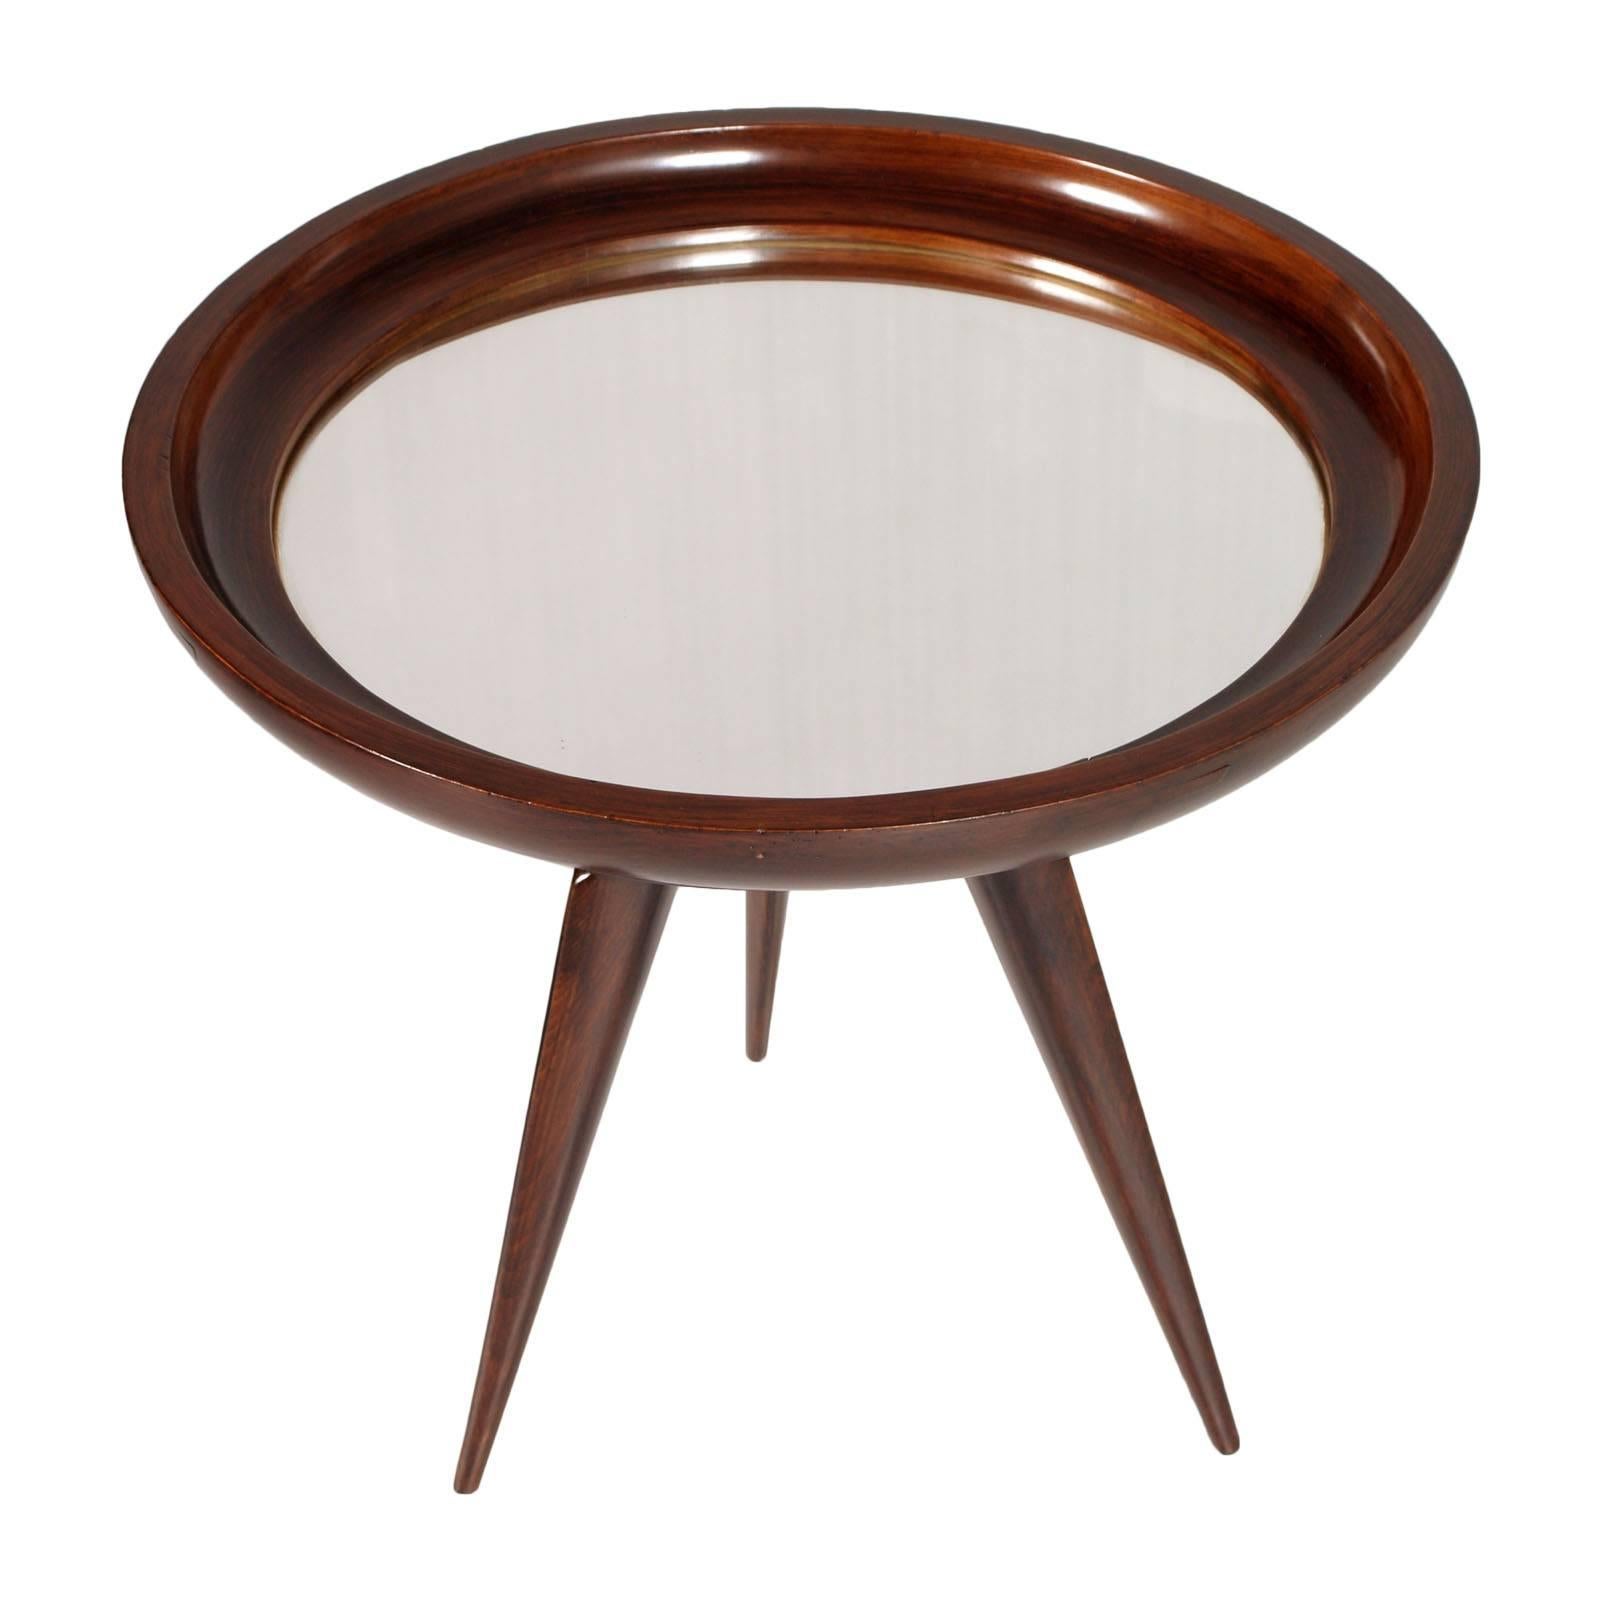 Awesome centre, coffee or side mirrored table in mahogany attribuited to Ico Parisi of the 1940s

Measures cm: Height 53 diameter 62.